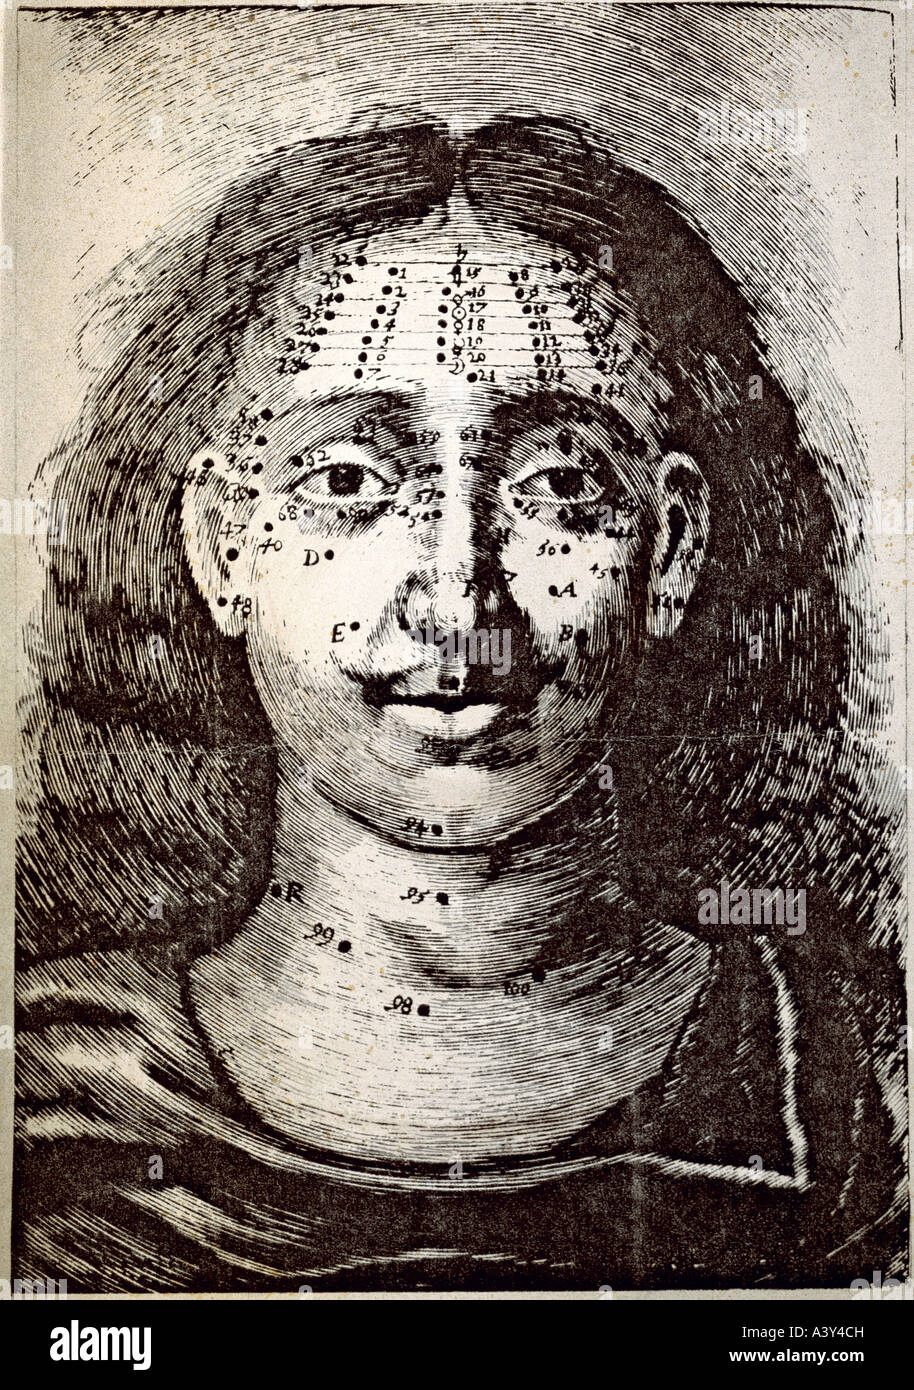 superstition, human face with astral influence zones on nerve points on front, face and neck, engraving, France / Italy, 17th / 18th century, private collection, historic, historical, Europe, esotericism, occultism, magic, human, number, numbers, early depiction of transfer of acupuncture and moxa, people, Stock Photo